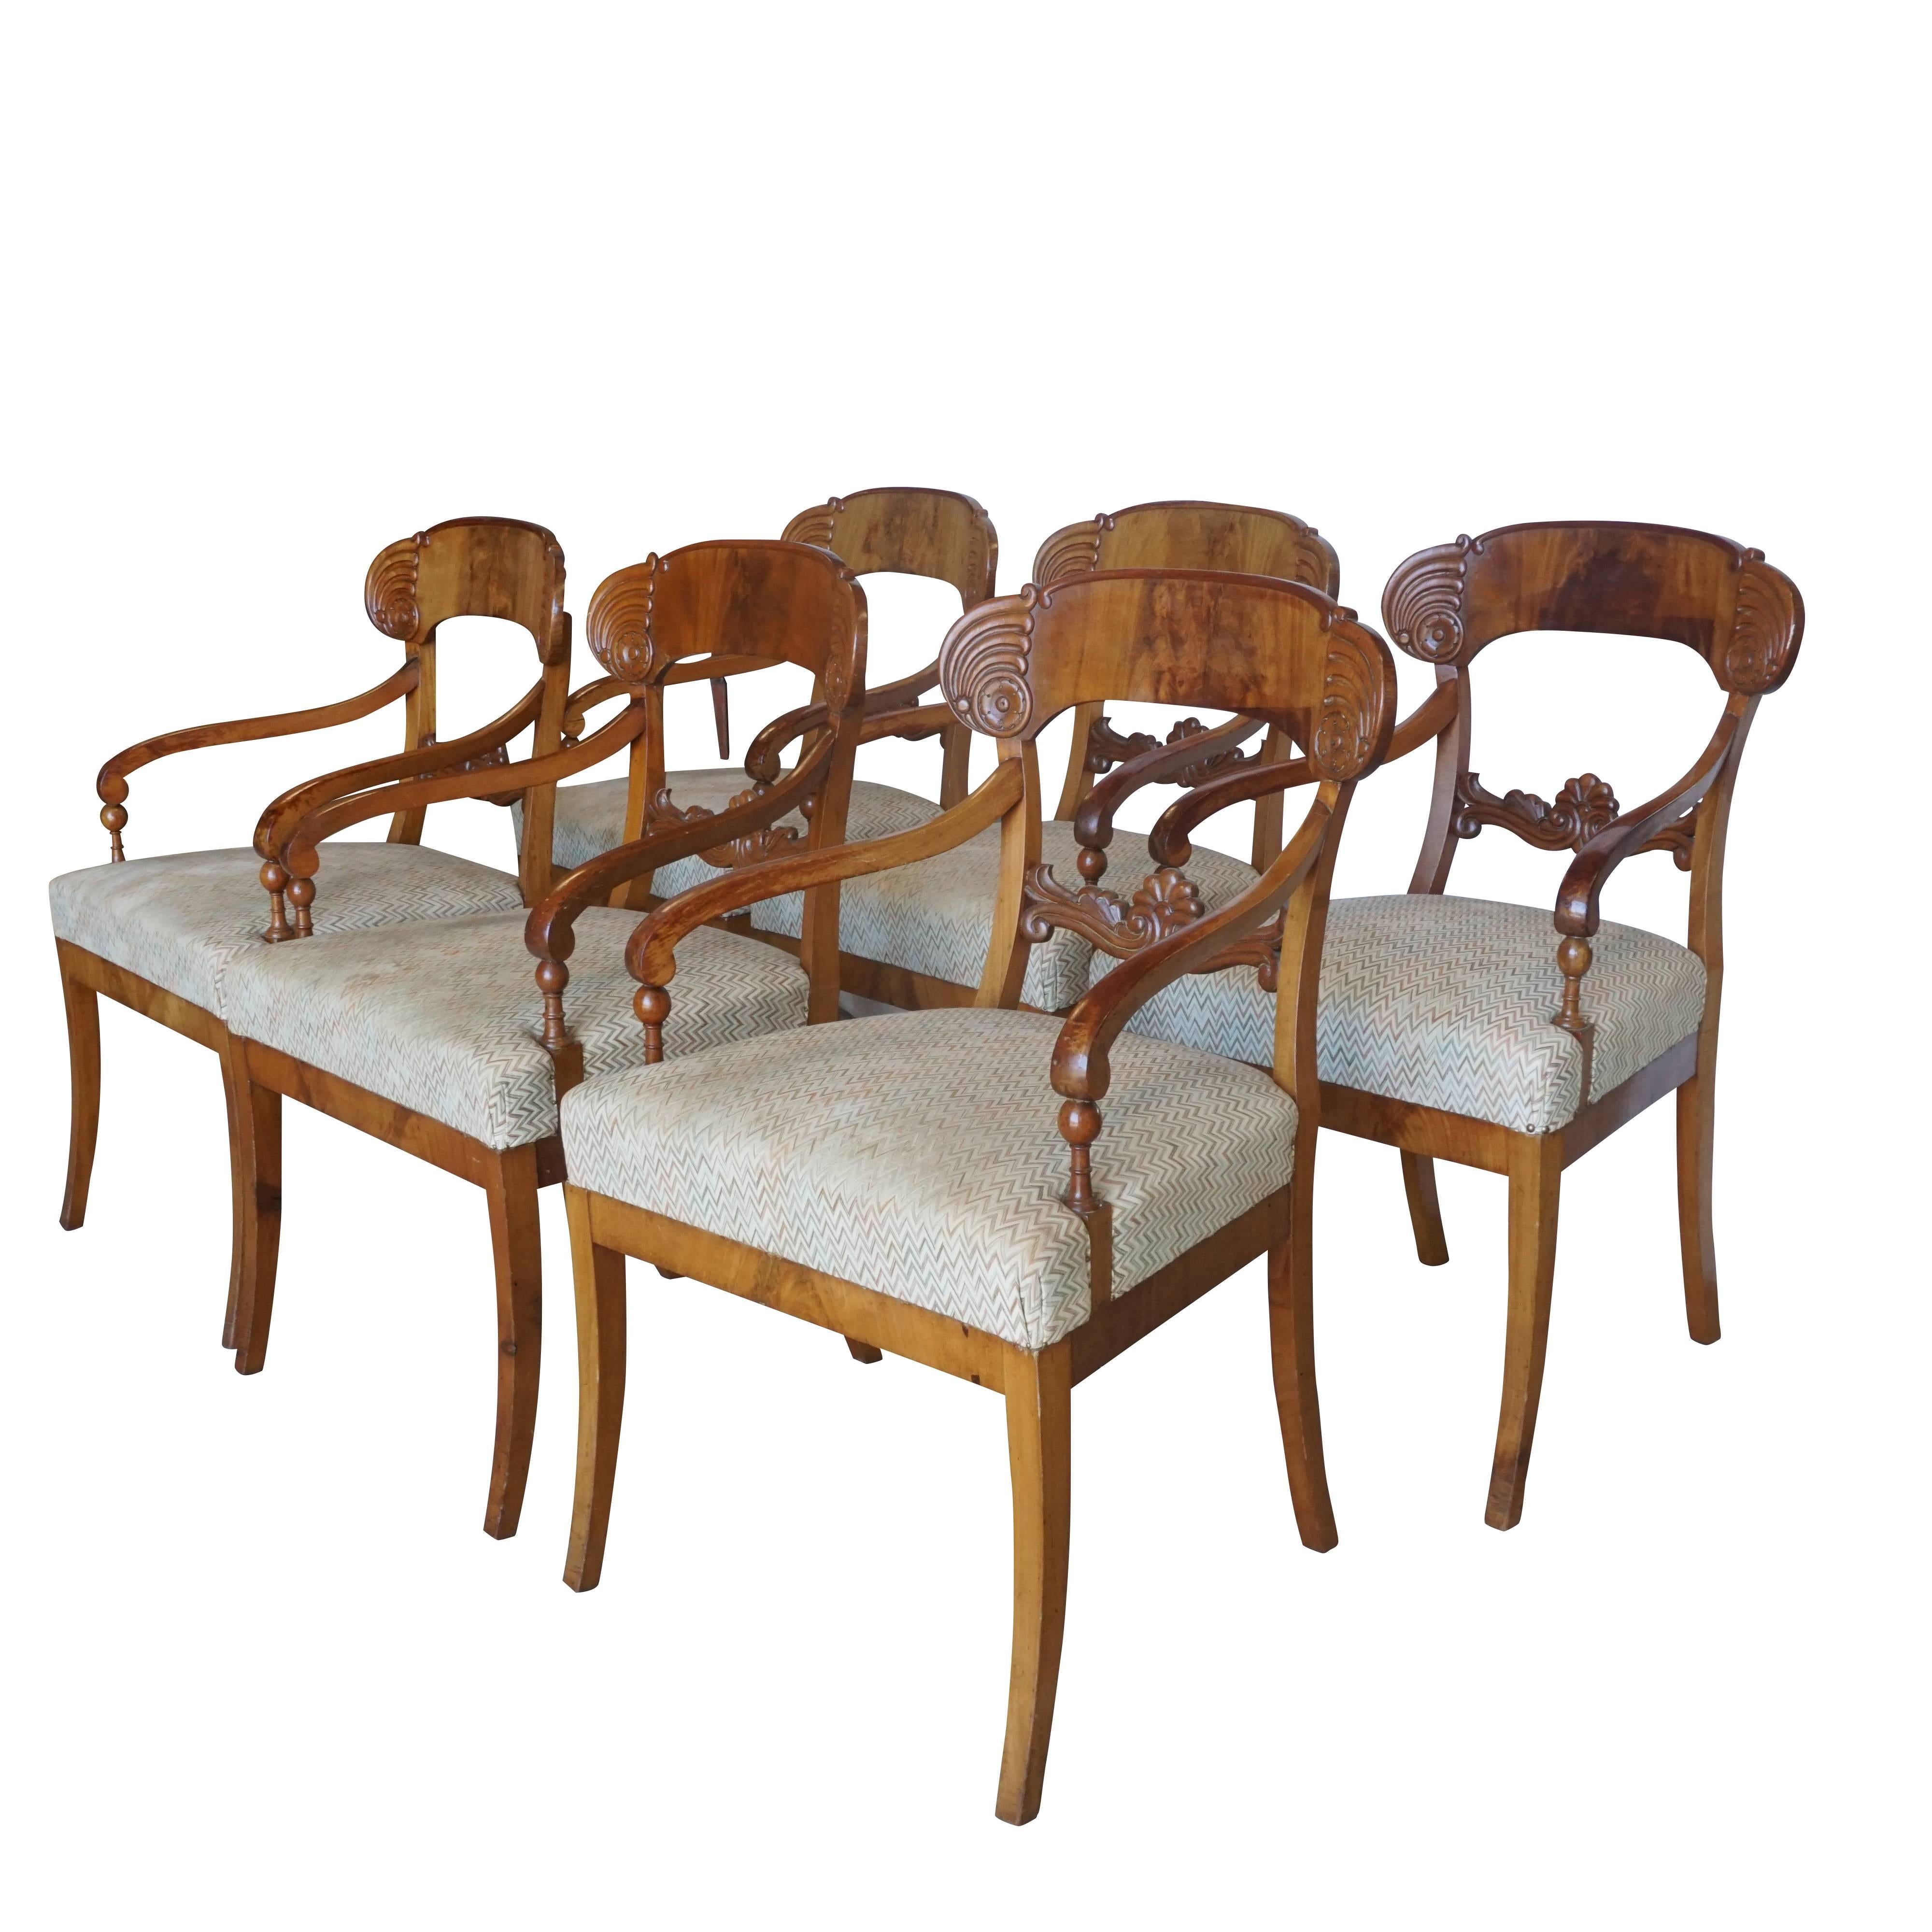 A light-brown, antique Swedish set of six Karl Johan period armchairs in good condition. The Scandinavian dining chairs are made of hand crafted Birchwood with shovel-shaped backrests, recessed volute arms, and newly upholstered seats and saber